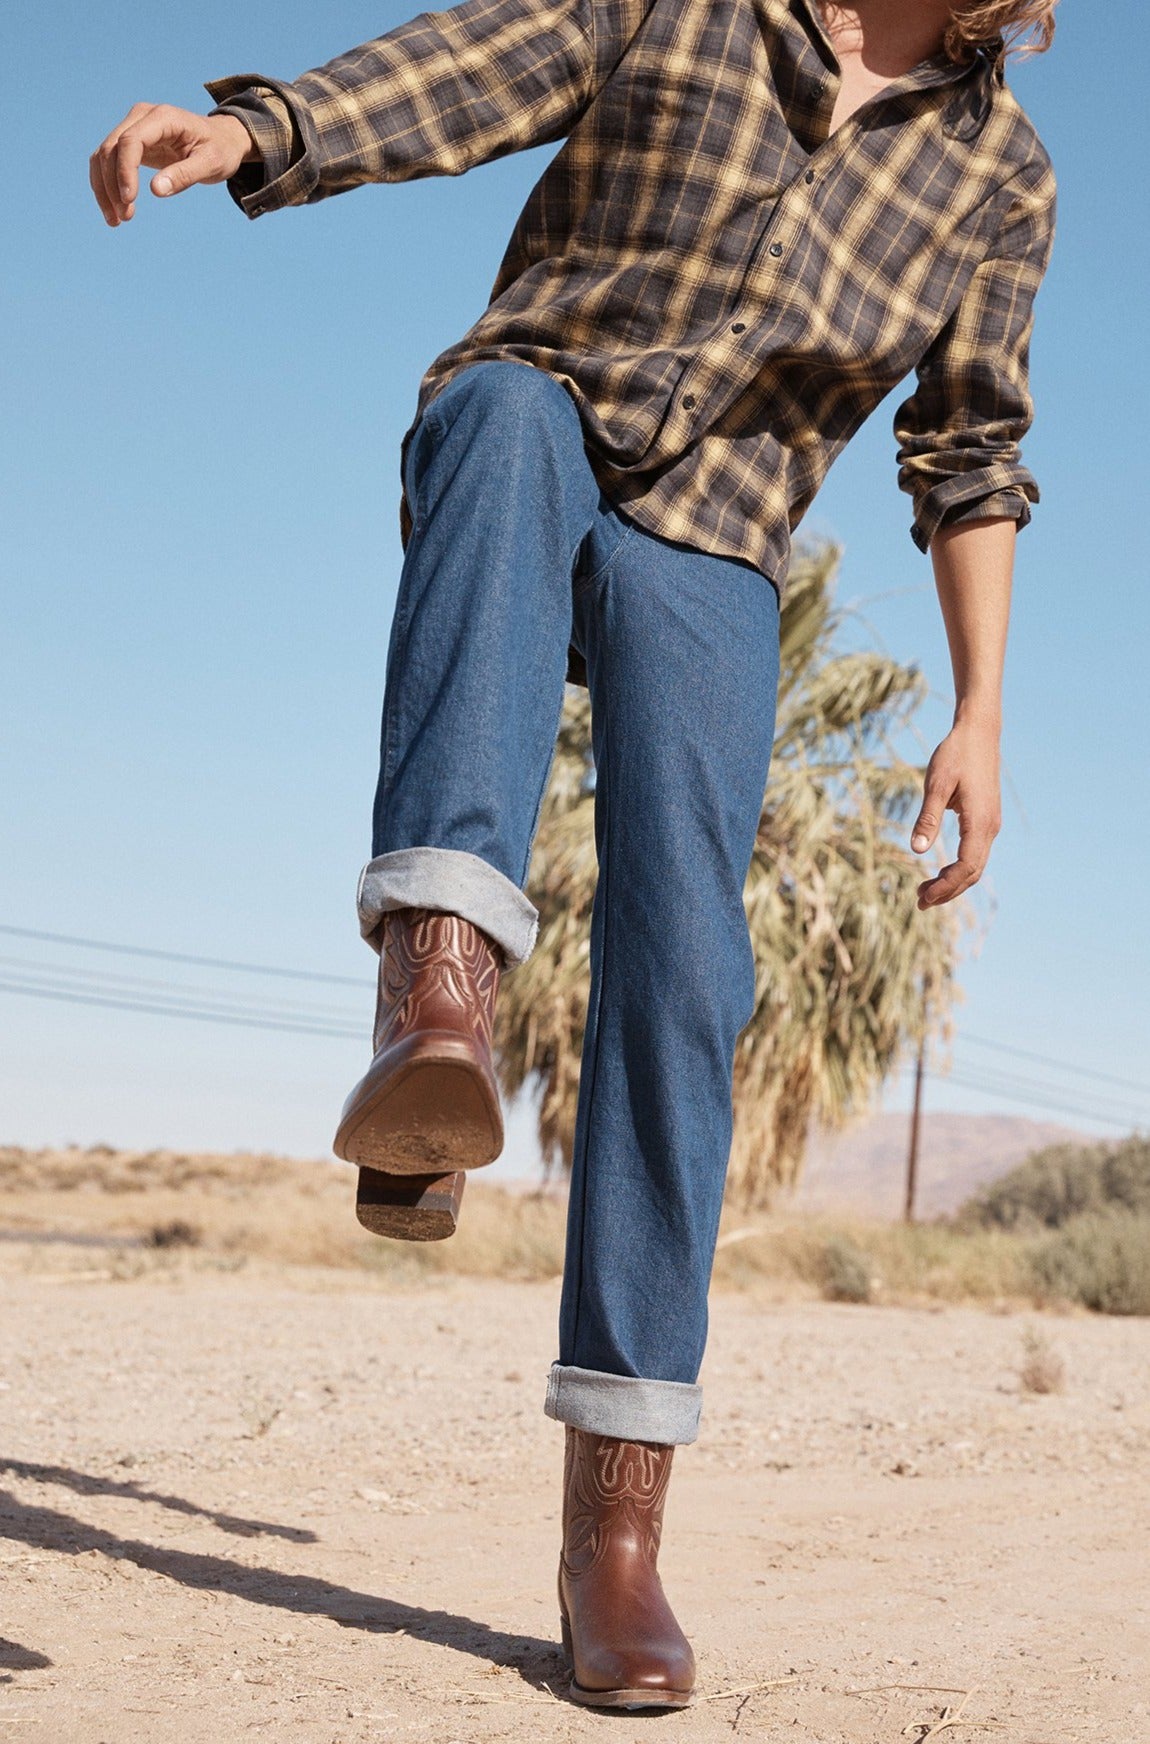 Western Style Guide: How To Wear Cowboy Boots for Men